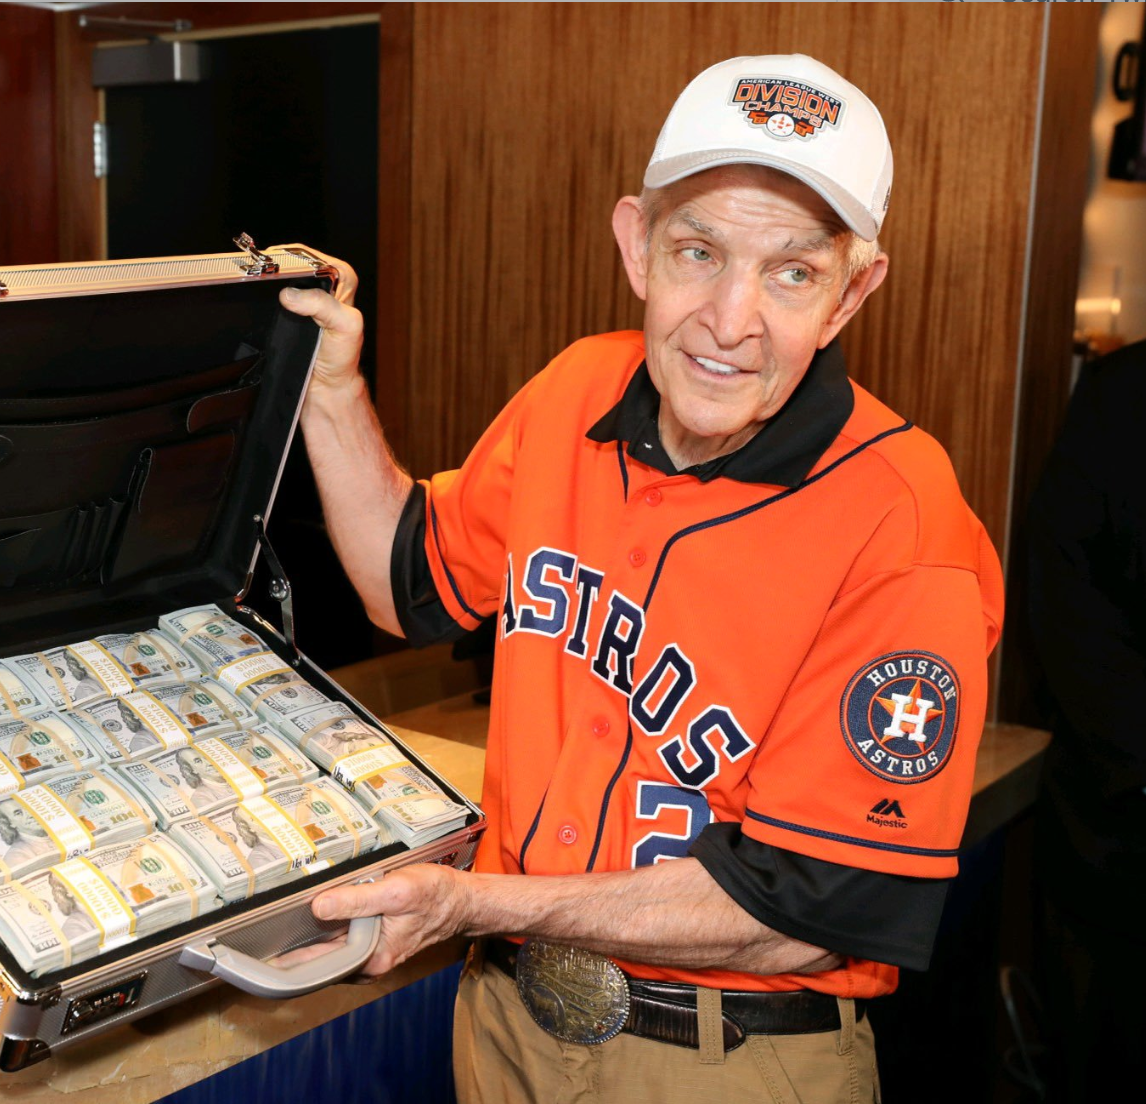 UNT alum/ex MG Football player Jim “Mattress” Mack” McIngvale bets $10  million on Astros! - The Eagles Nest (There Should be Pie For Everyone  Forum) 